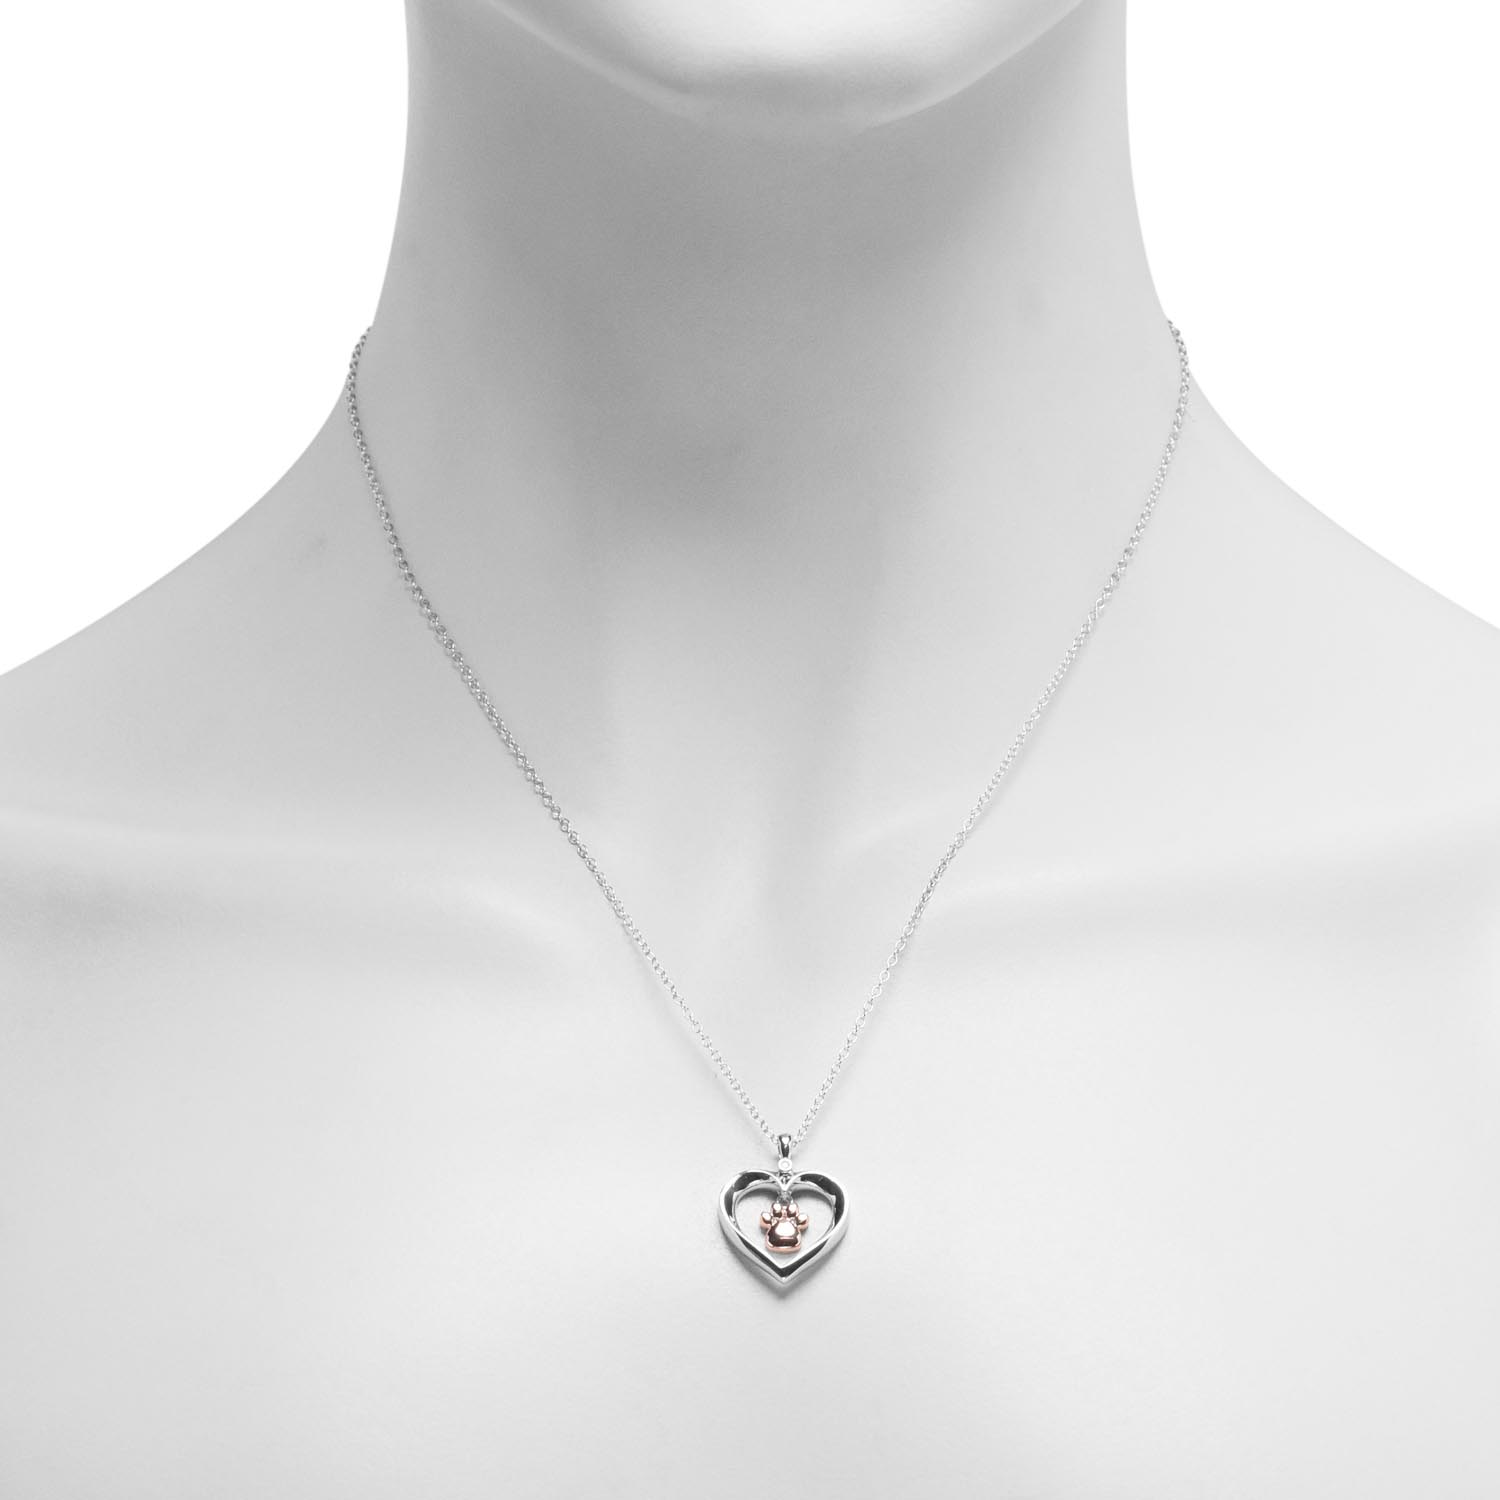 Puppy Love Necklace in Sterling Silver and Rose Gold Plate